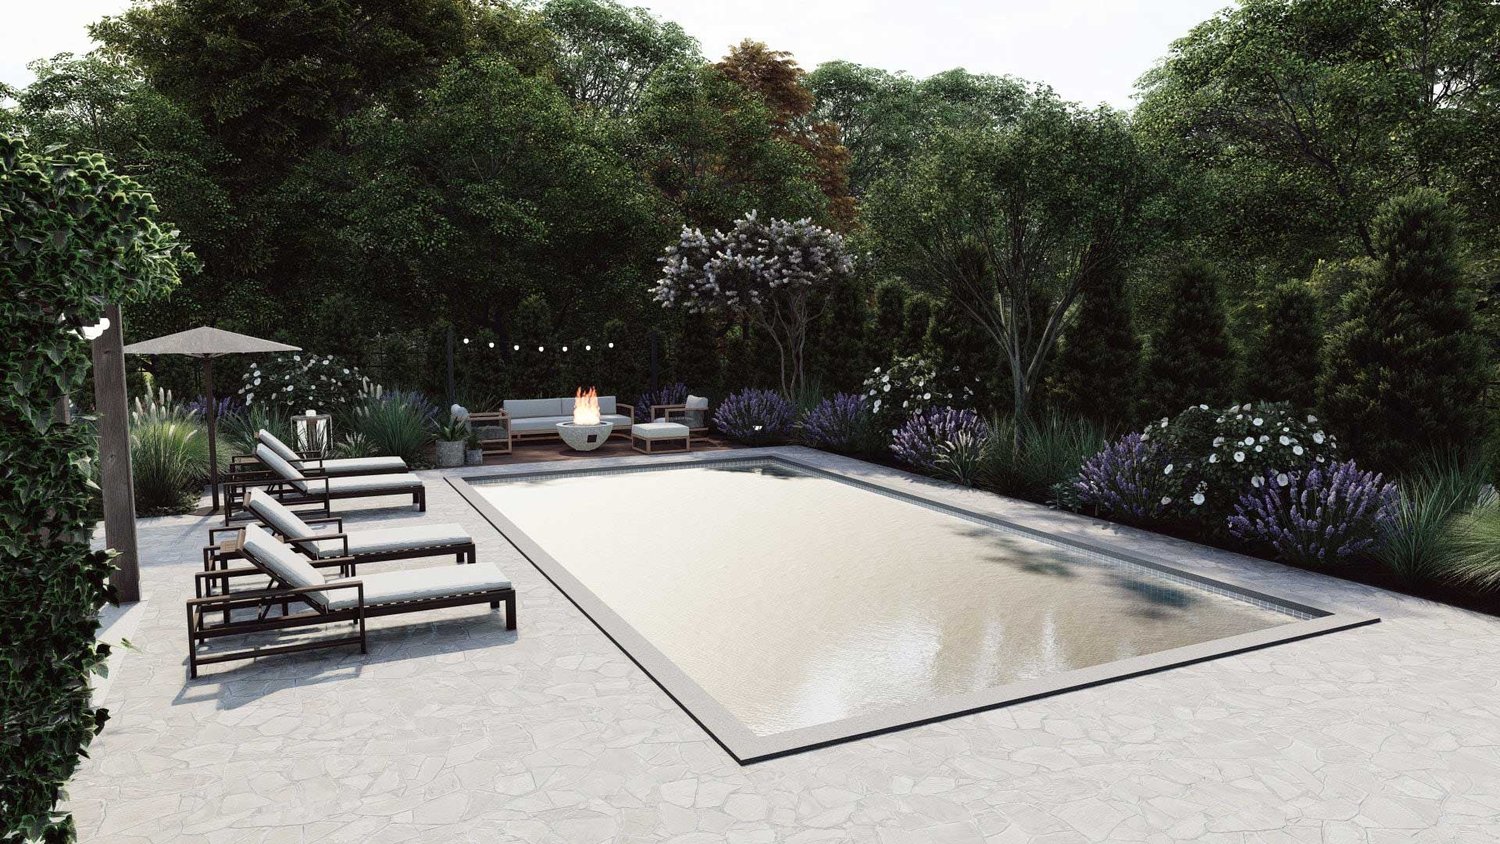 Ocean City in-ground pool in a garden, with lounge and fire pit seating area